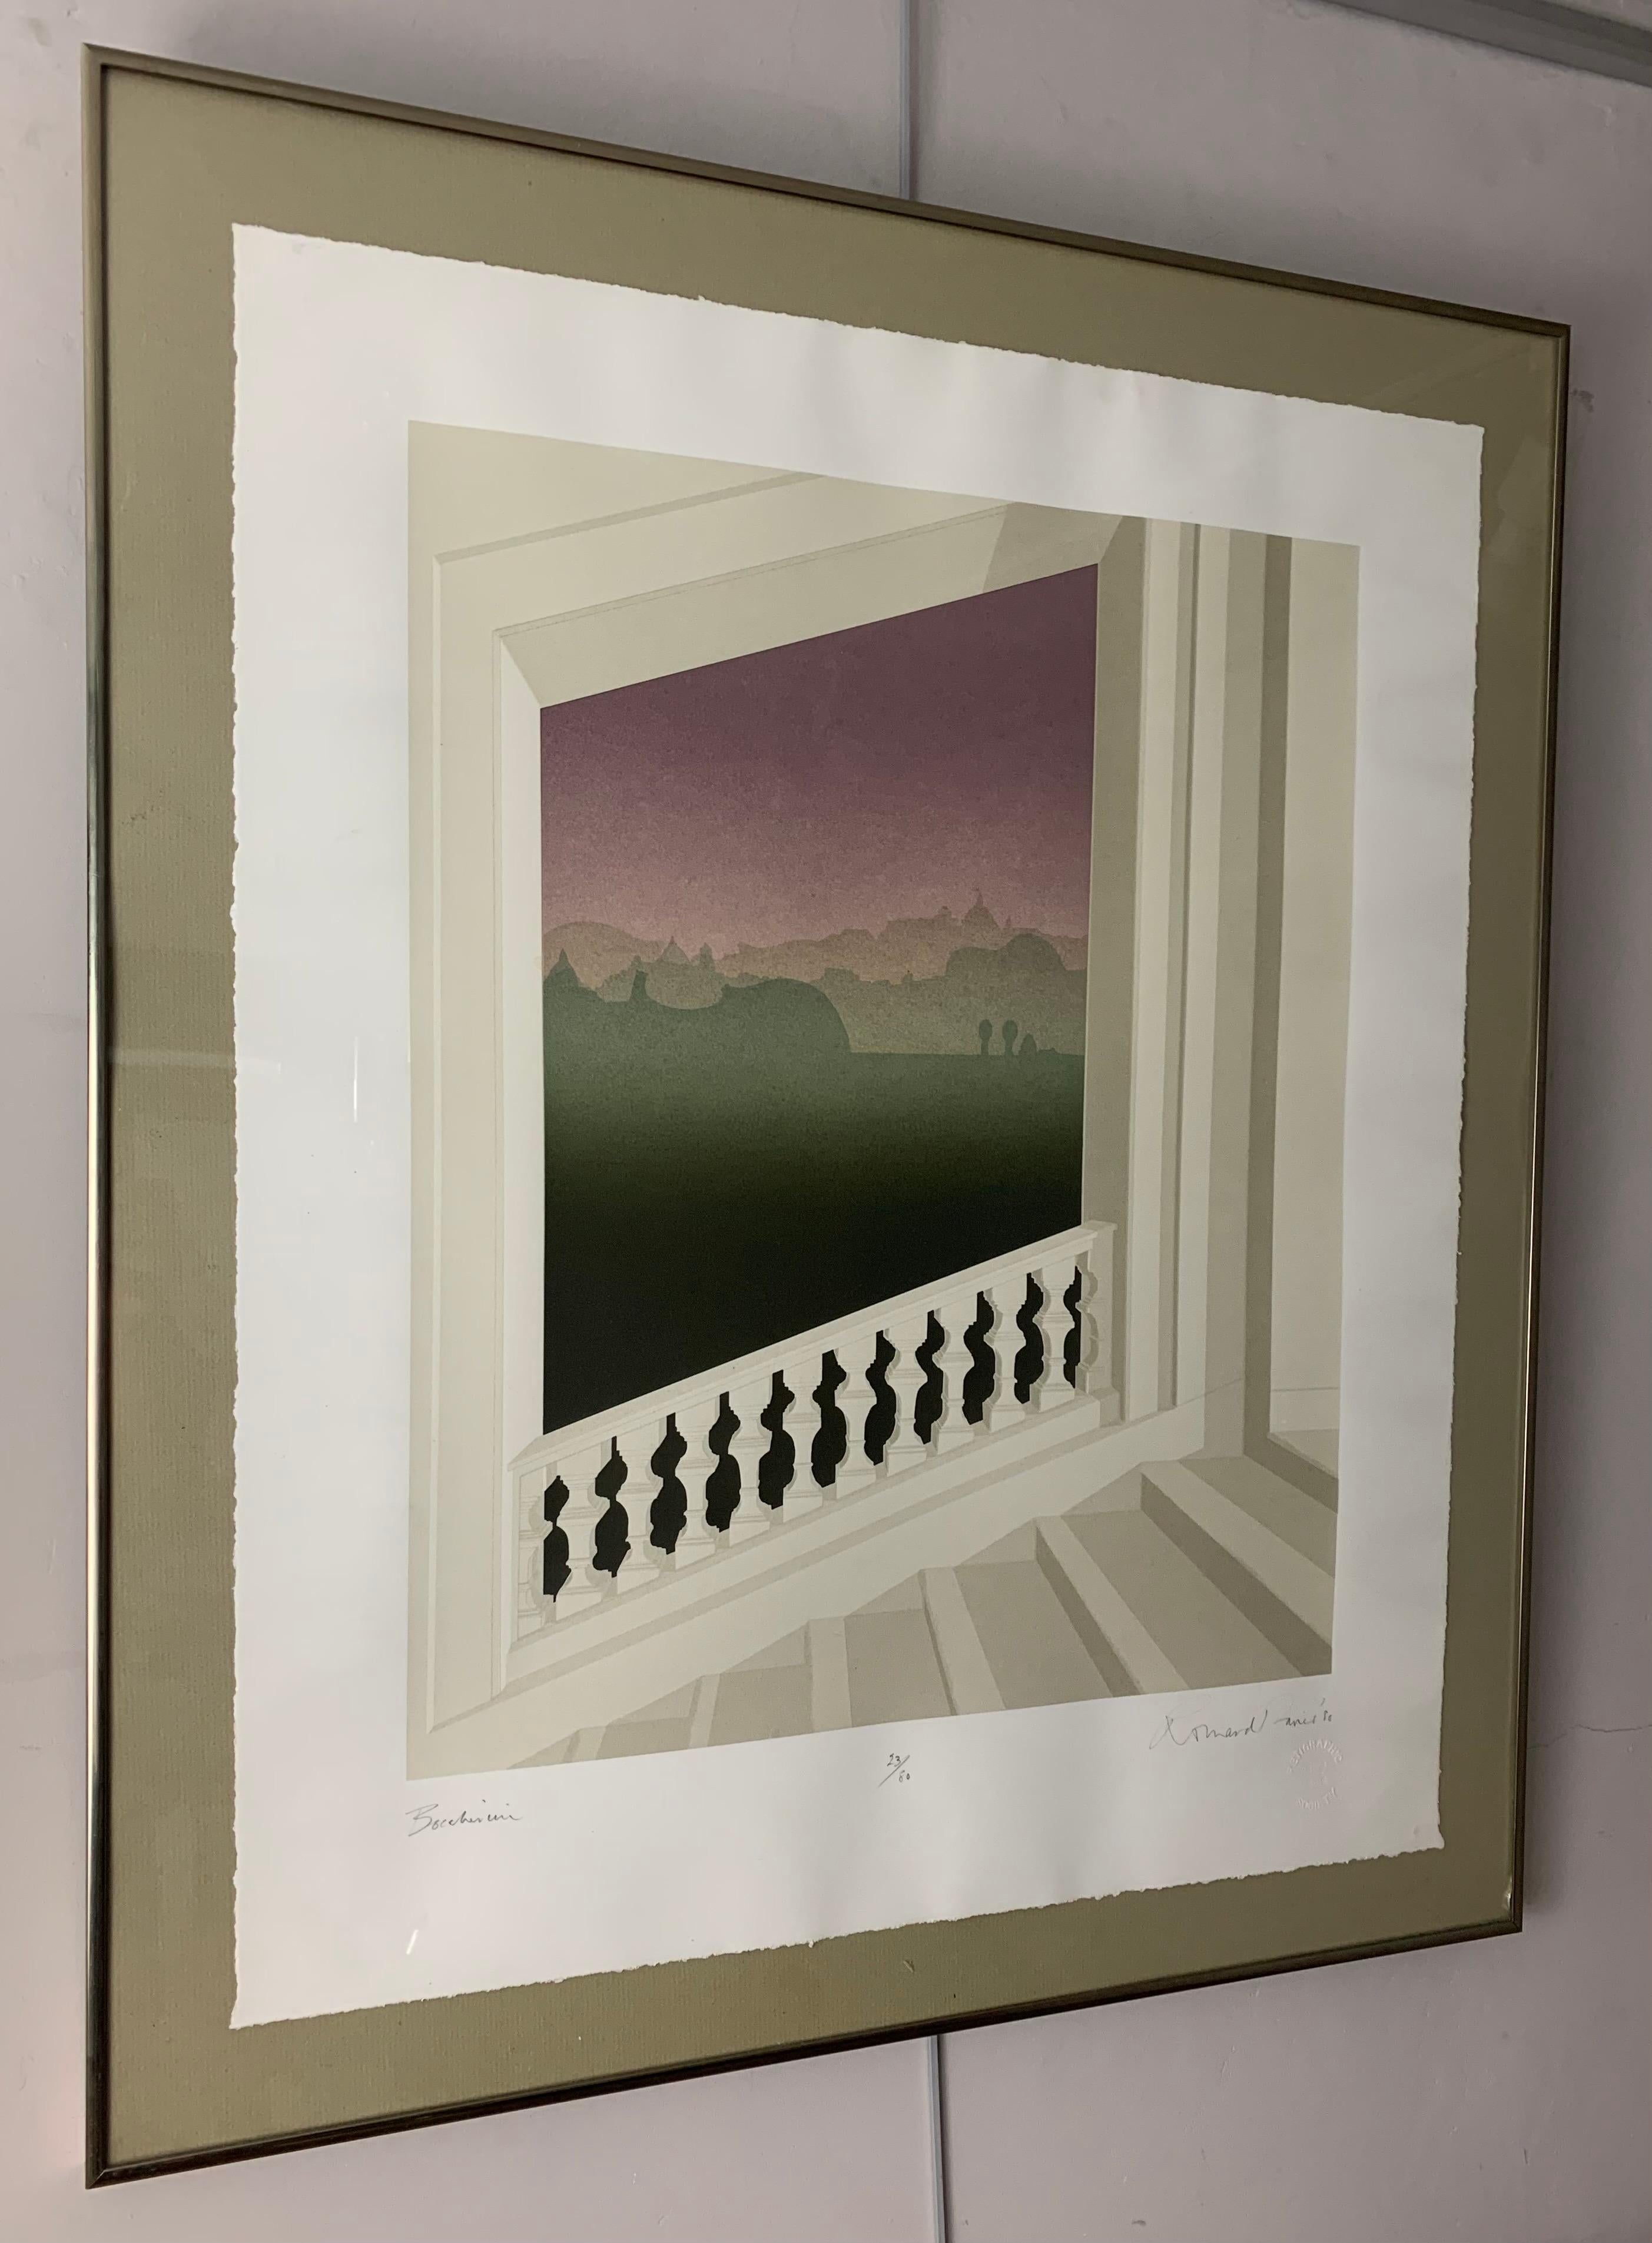 'Boccerini' signed limited edition print by architectural artist Richard Davies.

Published 1980. Edition 23 out of 80. Mounted on an olive coloured mount with a gold metal chromed frame.

Dimensions: Frame: H: 82cm W: 70cm D: 2cm Paper: W: 60cm